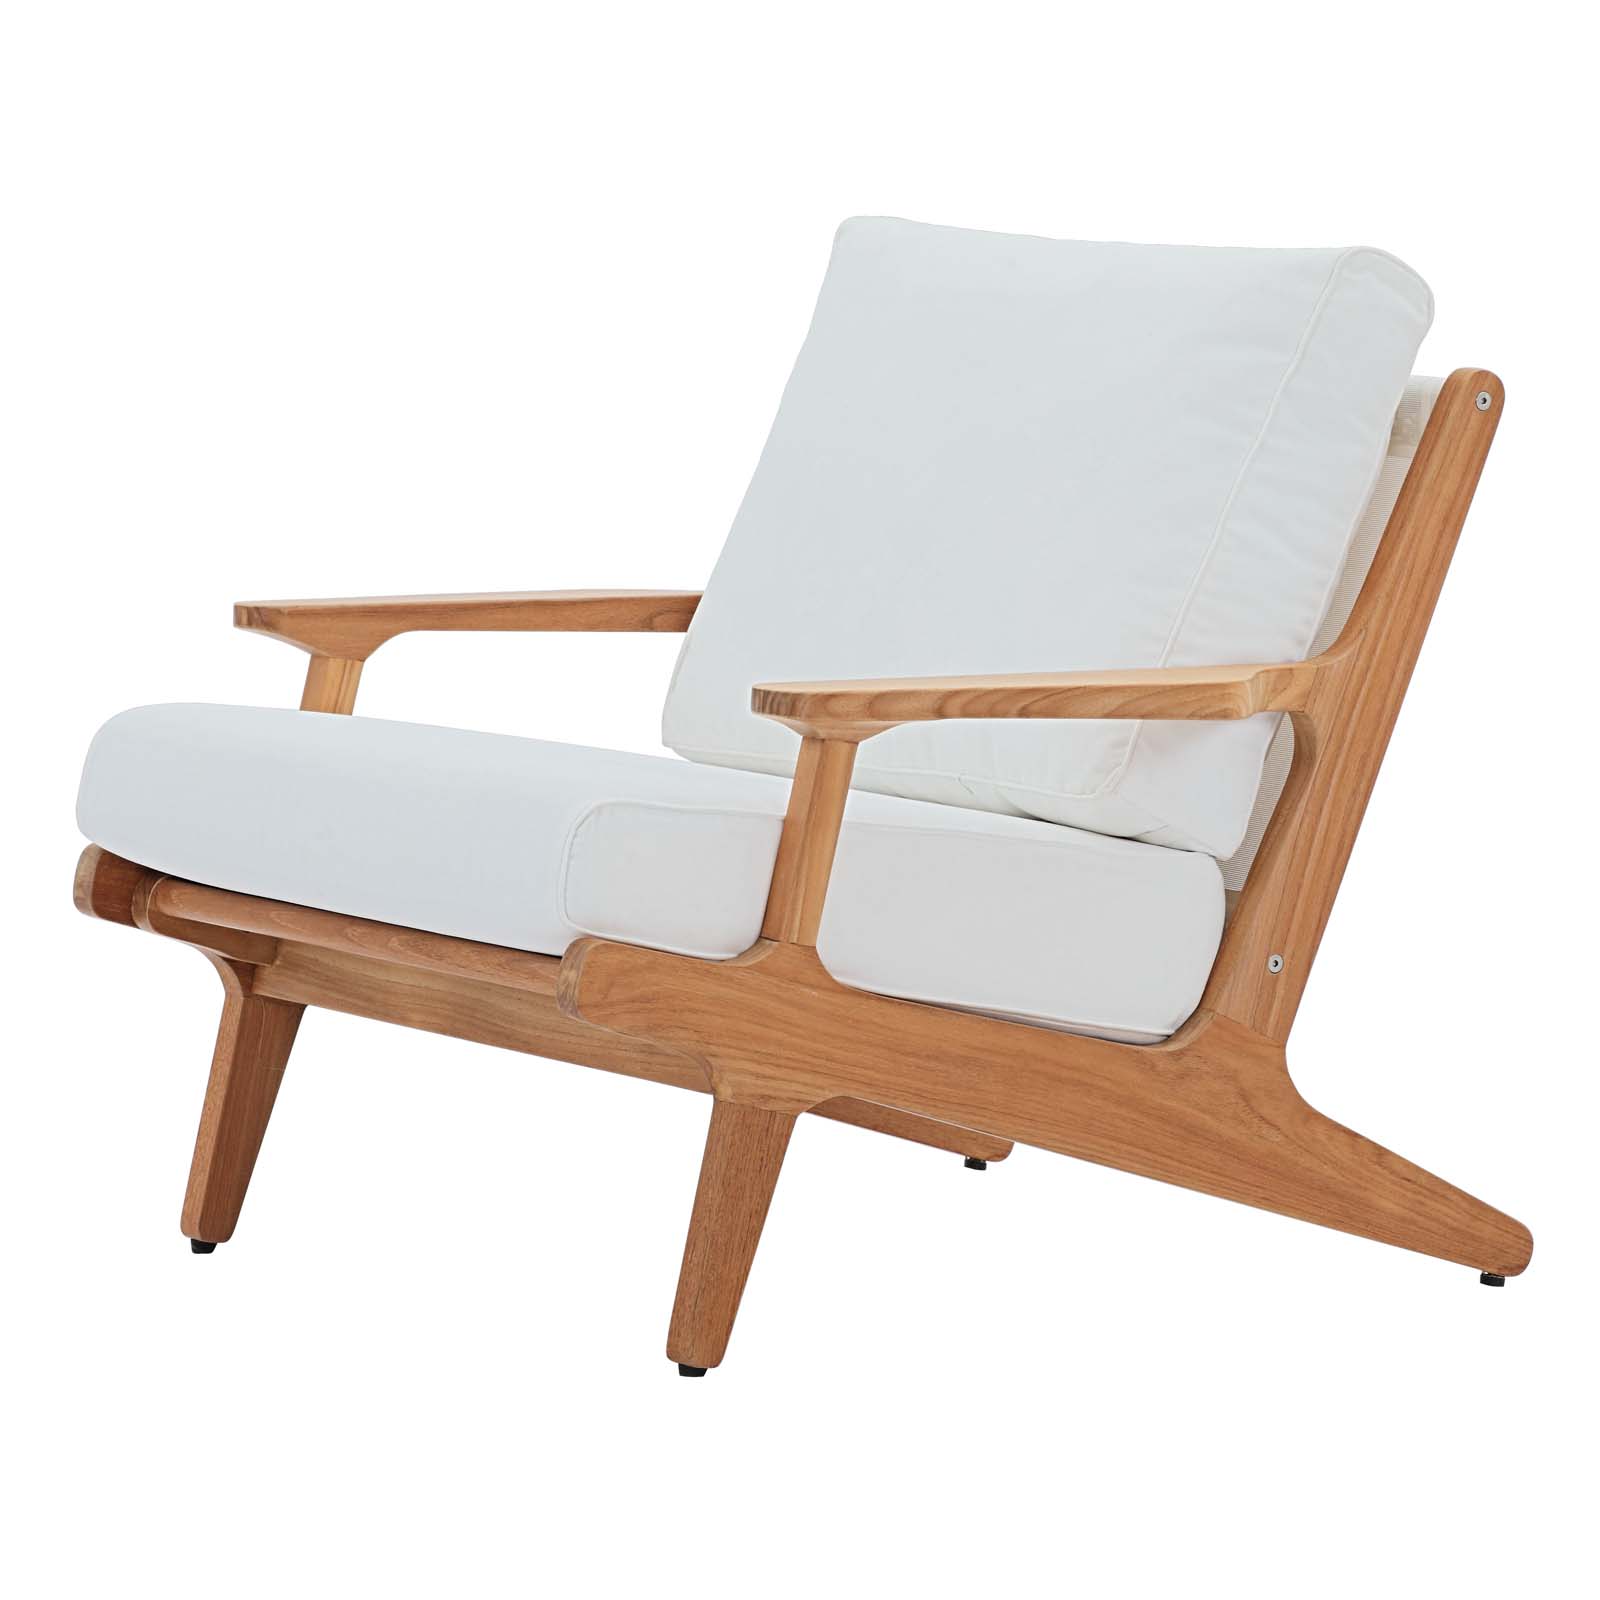 Modern Contemporary Urban Design Outdoor Patio Balcony Garden Furniture Lounge Chair and Sofa Set, Wood, White Natural - image 3 of 8